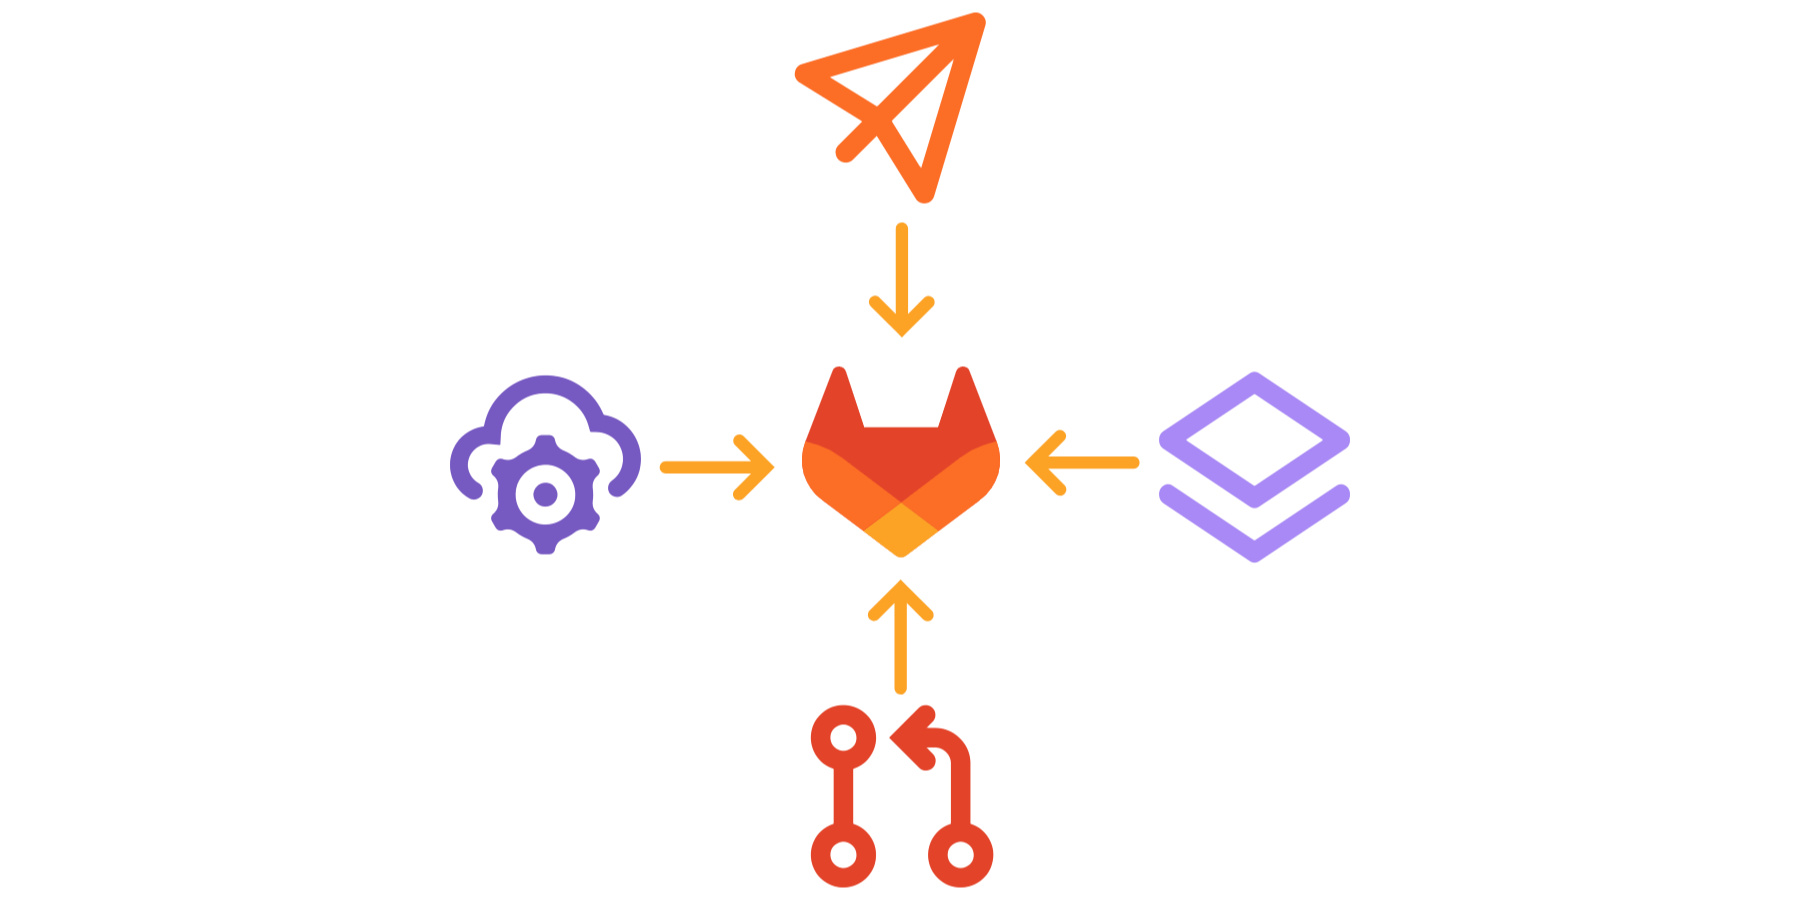 4 approaches to GitLab integrations